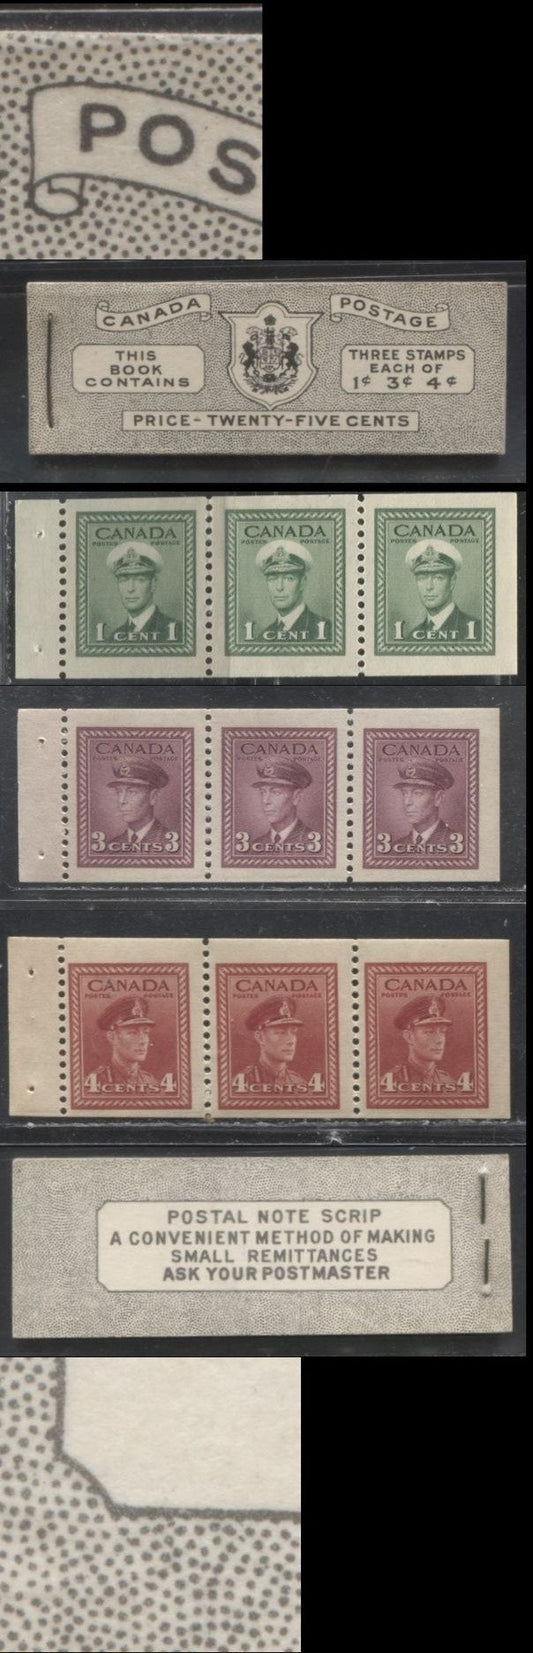 Lot 189 Canada #BK38a 1942-1949 War Issue Complete 25c, English Booklet Containing 1 Pane Each of 3 of 1c Green, 3c Rosy Plum and 4c Carmine Red, Harris Front Cover Type IVb , Back Cover Haiv, 7c & 6c Rate Page